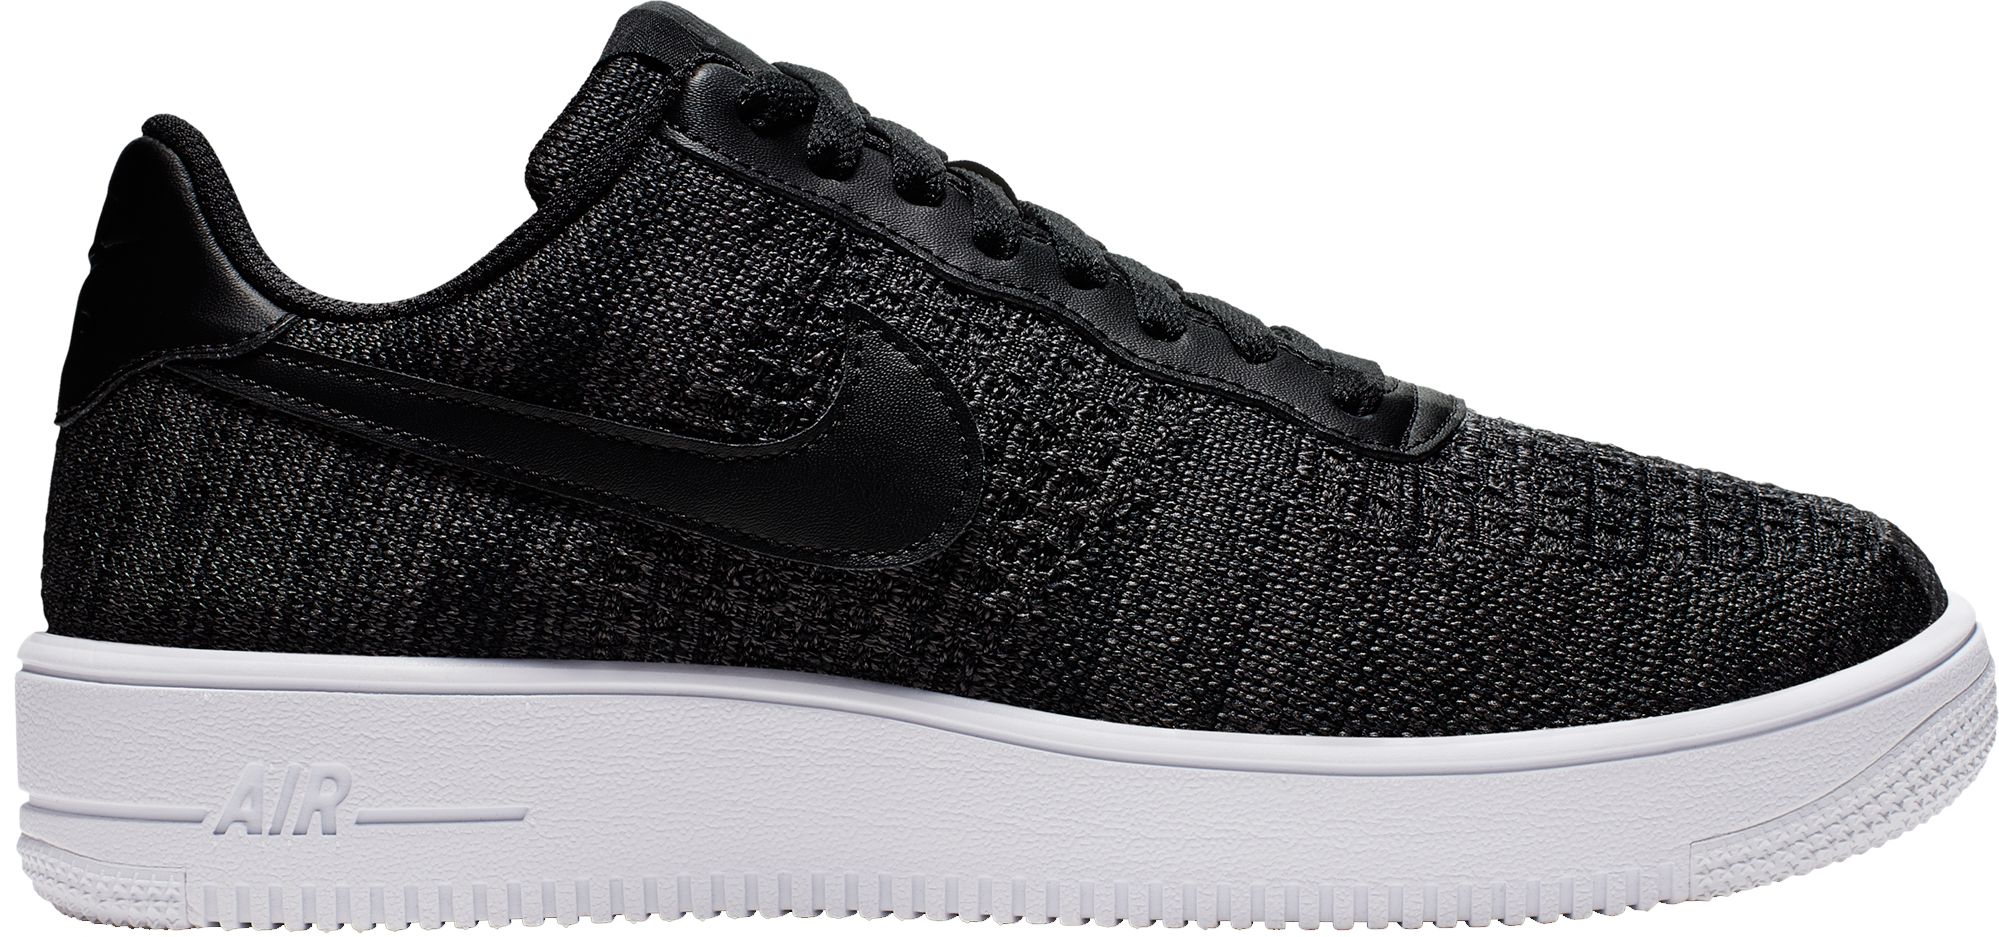 Air Force 1 Flyknit 2.0 Shoes 